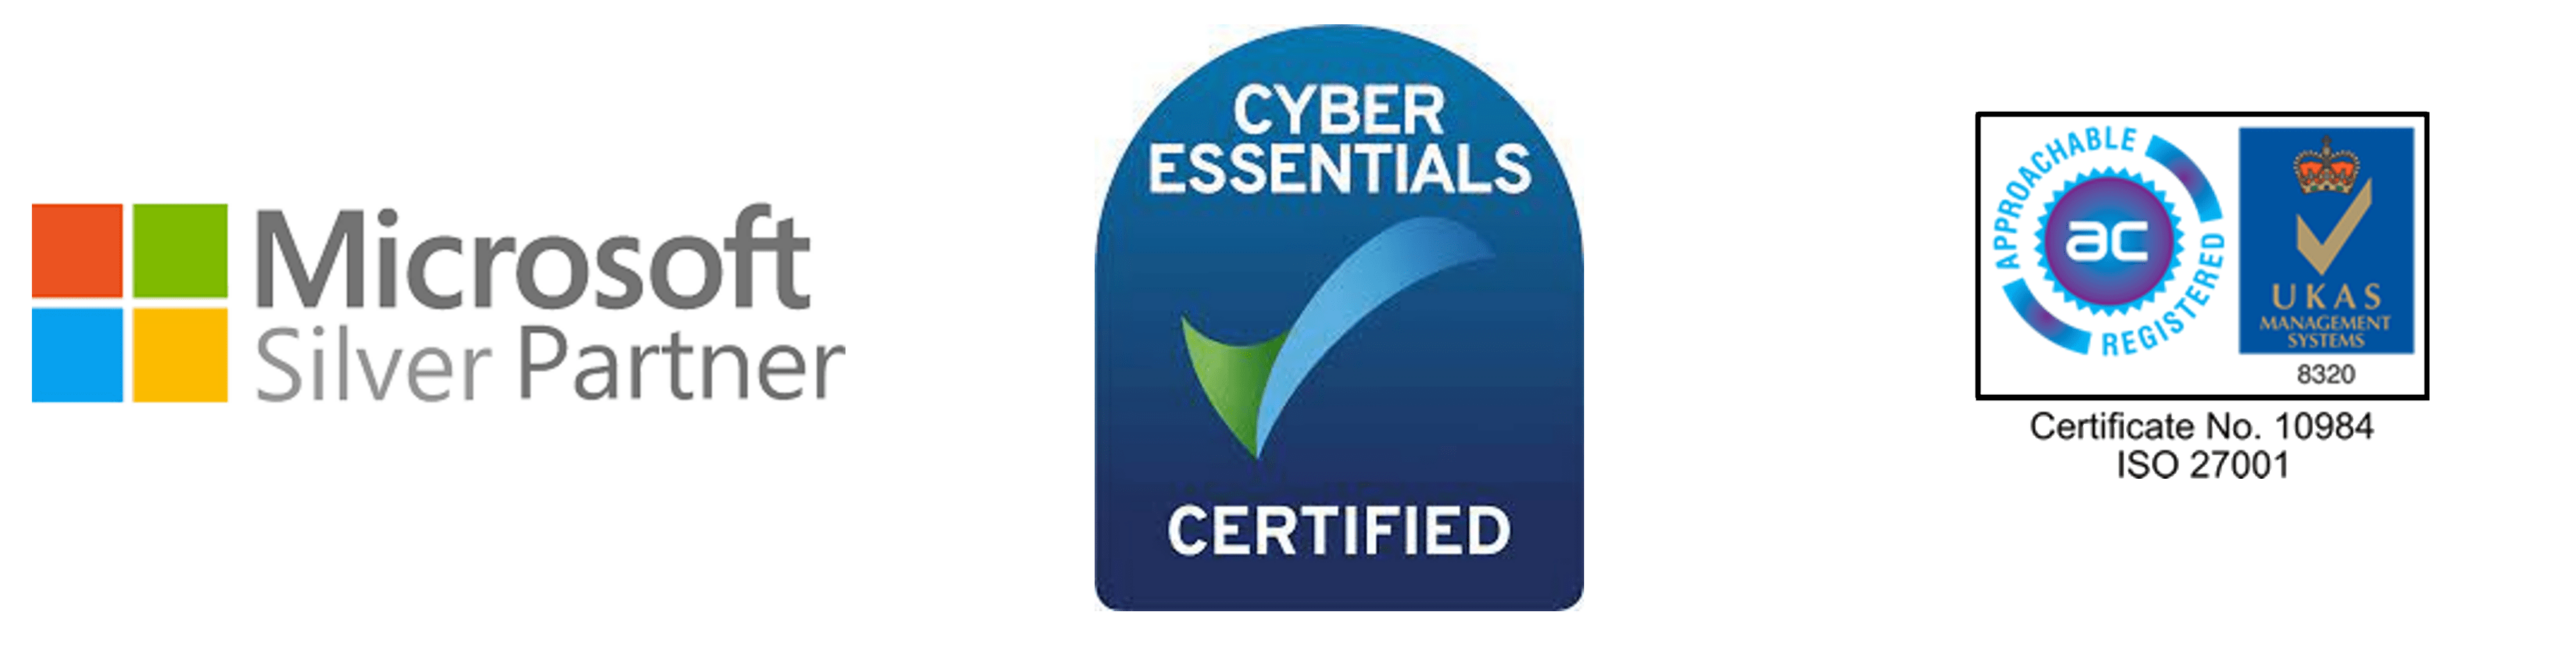 3 badges next to each other, one which says Microsoft Silver Partner, one which says cyber essentials certified, and one which says ISO 27001 certified and registered